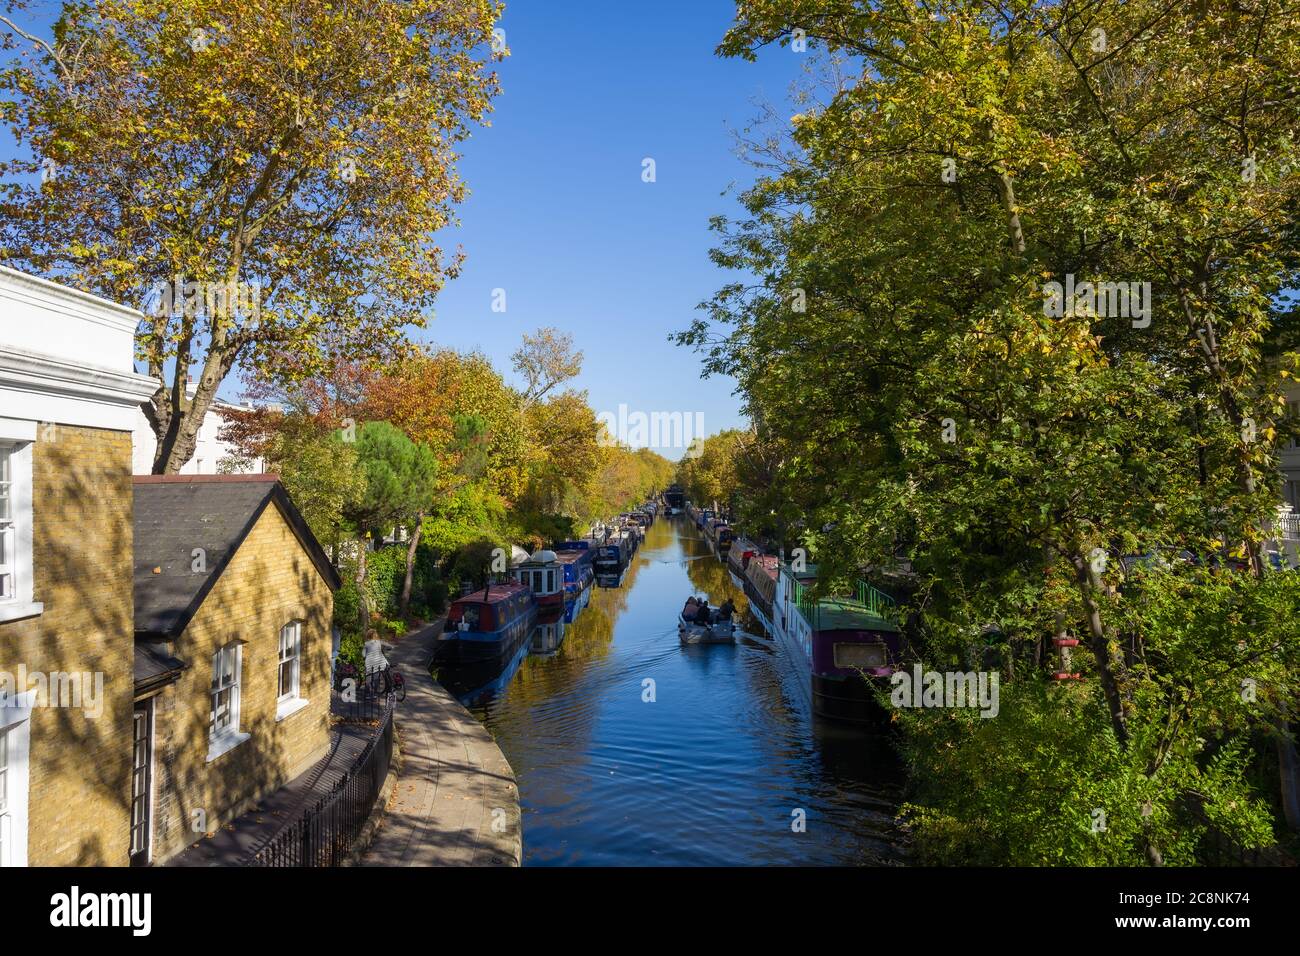 A view from the bridge down the canal at Little Venice. Shows trees, houseboats, towpath and boat ride on beautiful sunny autumn day. Stock Photo